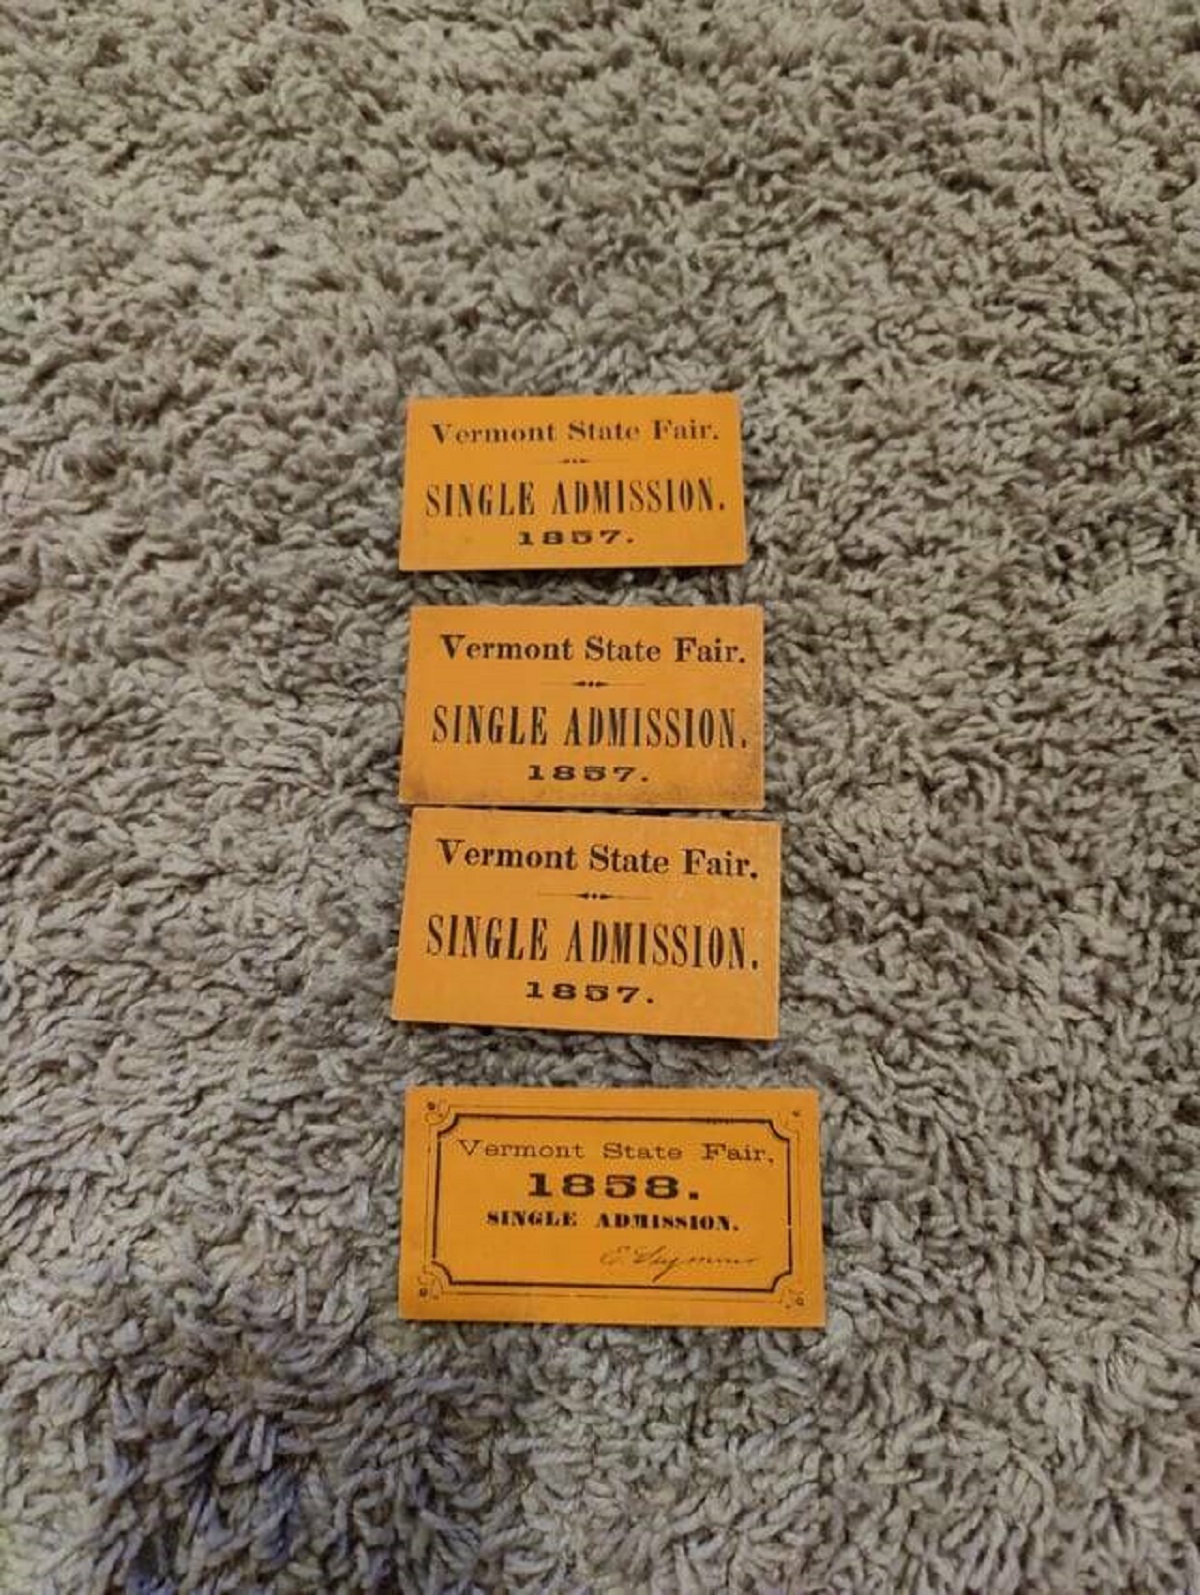 "Tickets to the Vermont State Fair from 1857 and 1858 that I have"